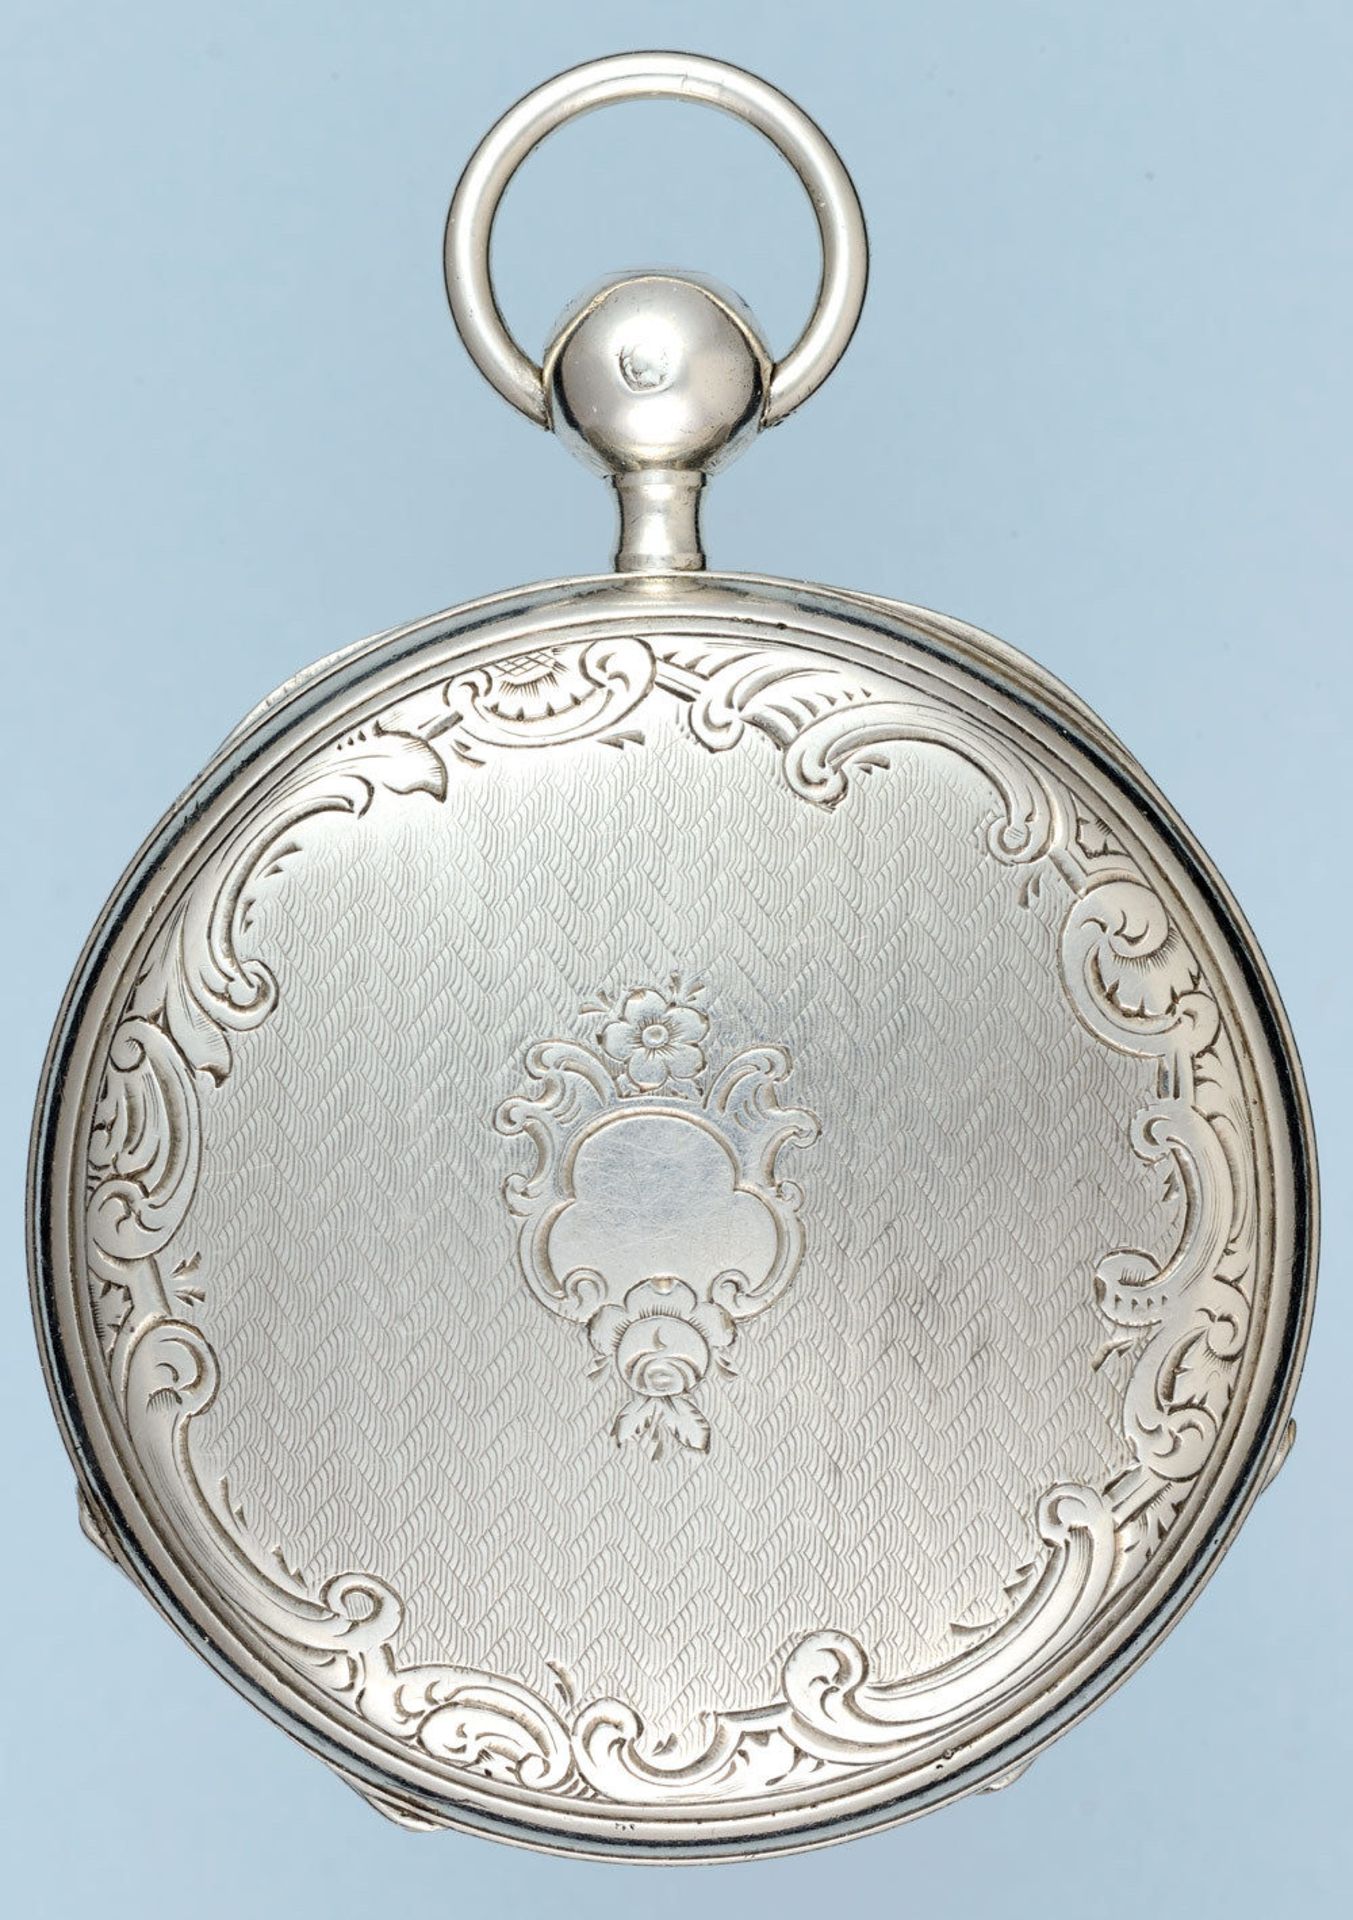 Rare Silver Virgule Repeating Pocketwatch - Image 2 of 4